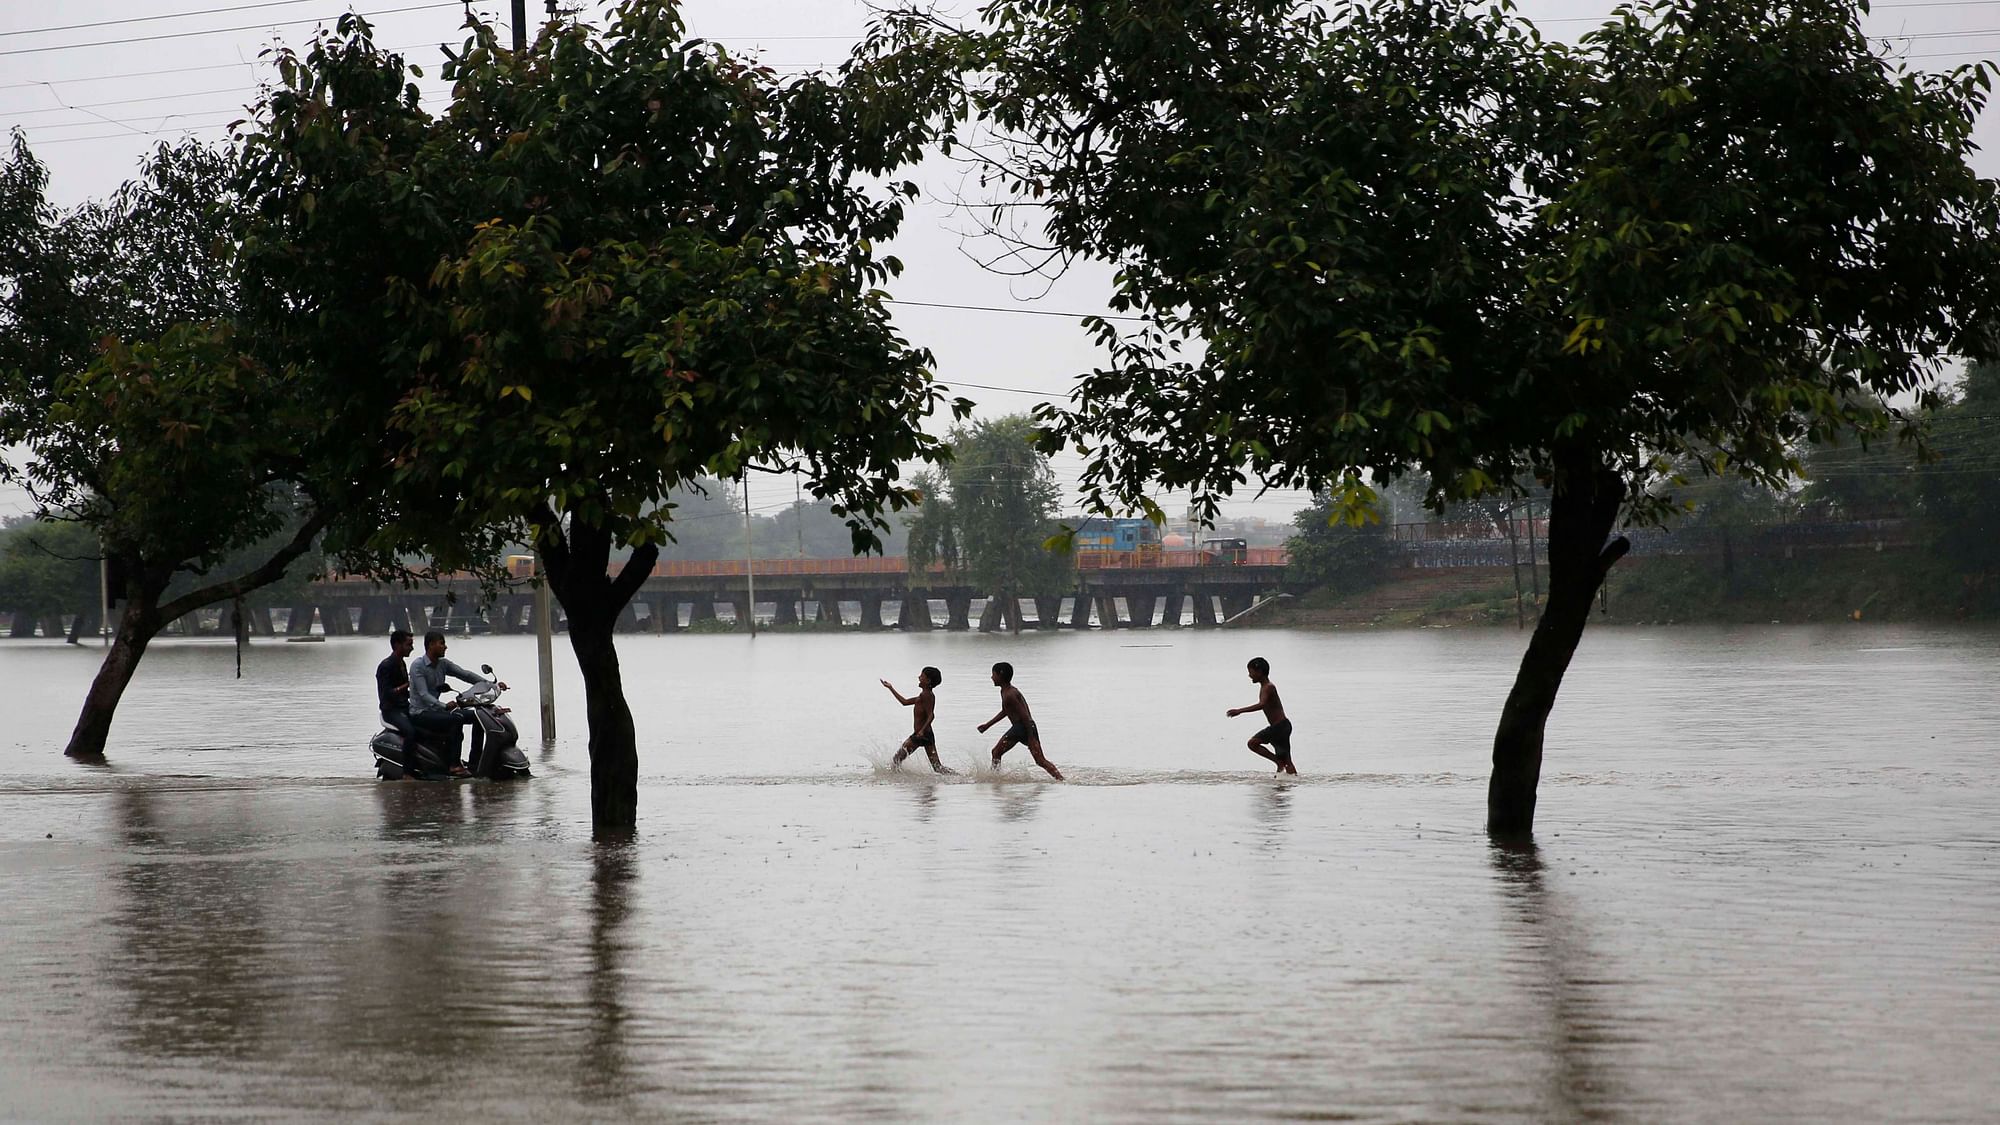 More than 4,000 people, including women and children, were rescued from the flood-affected areas of Patna.